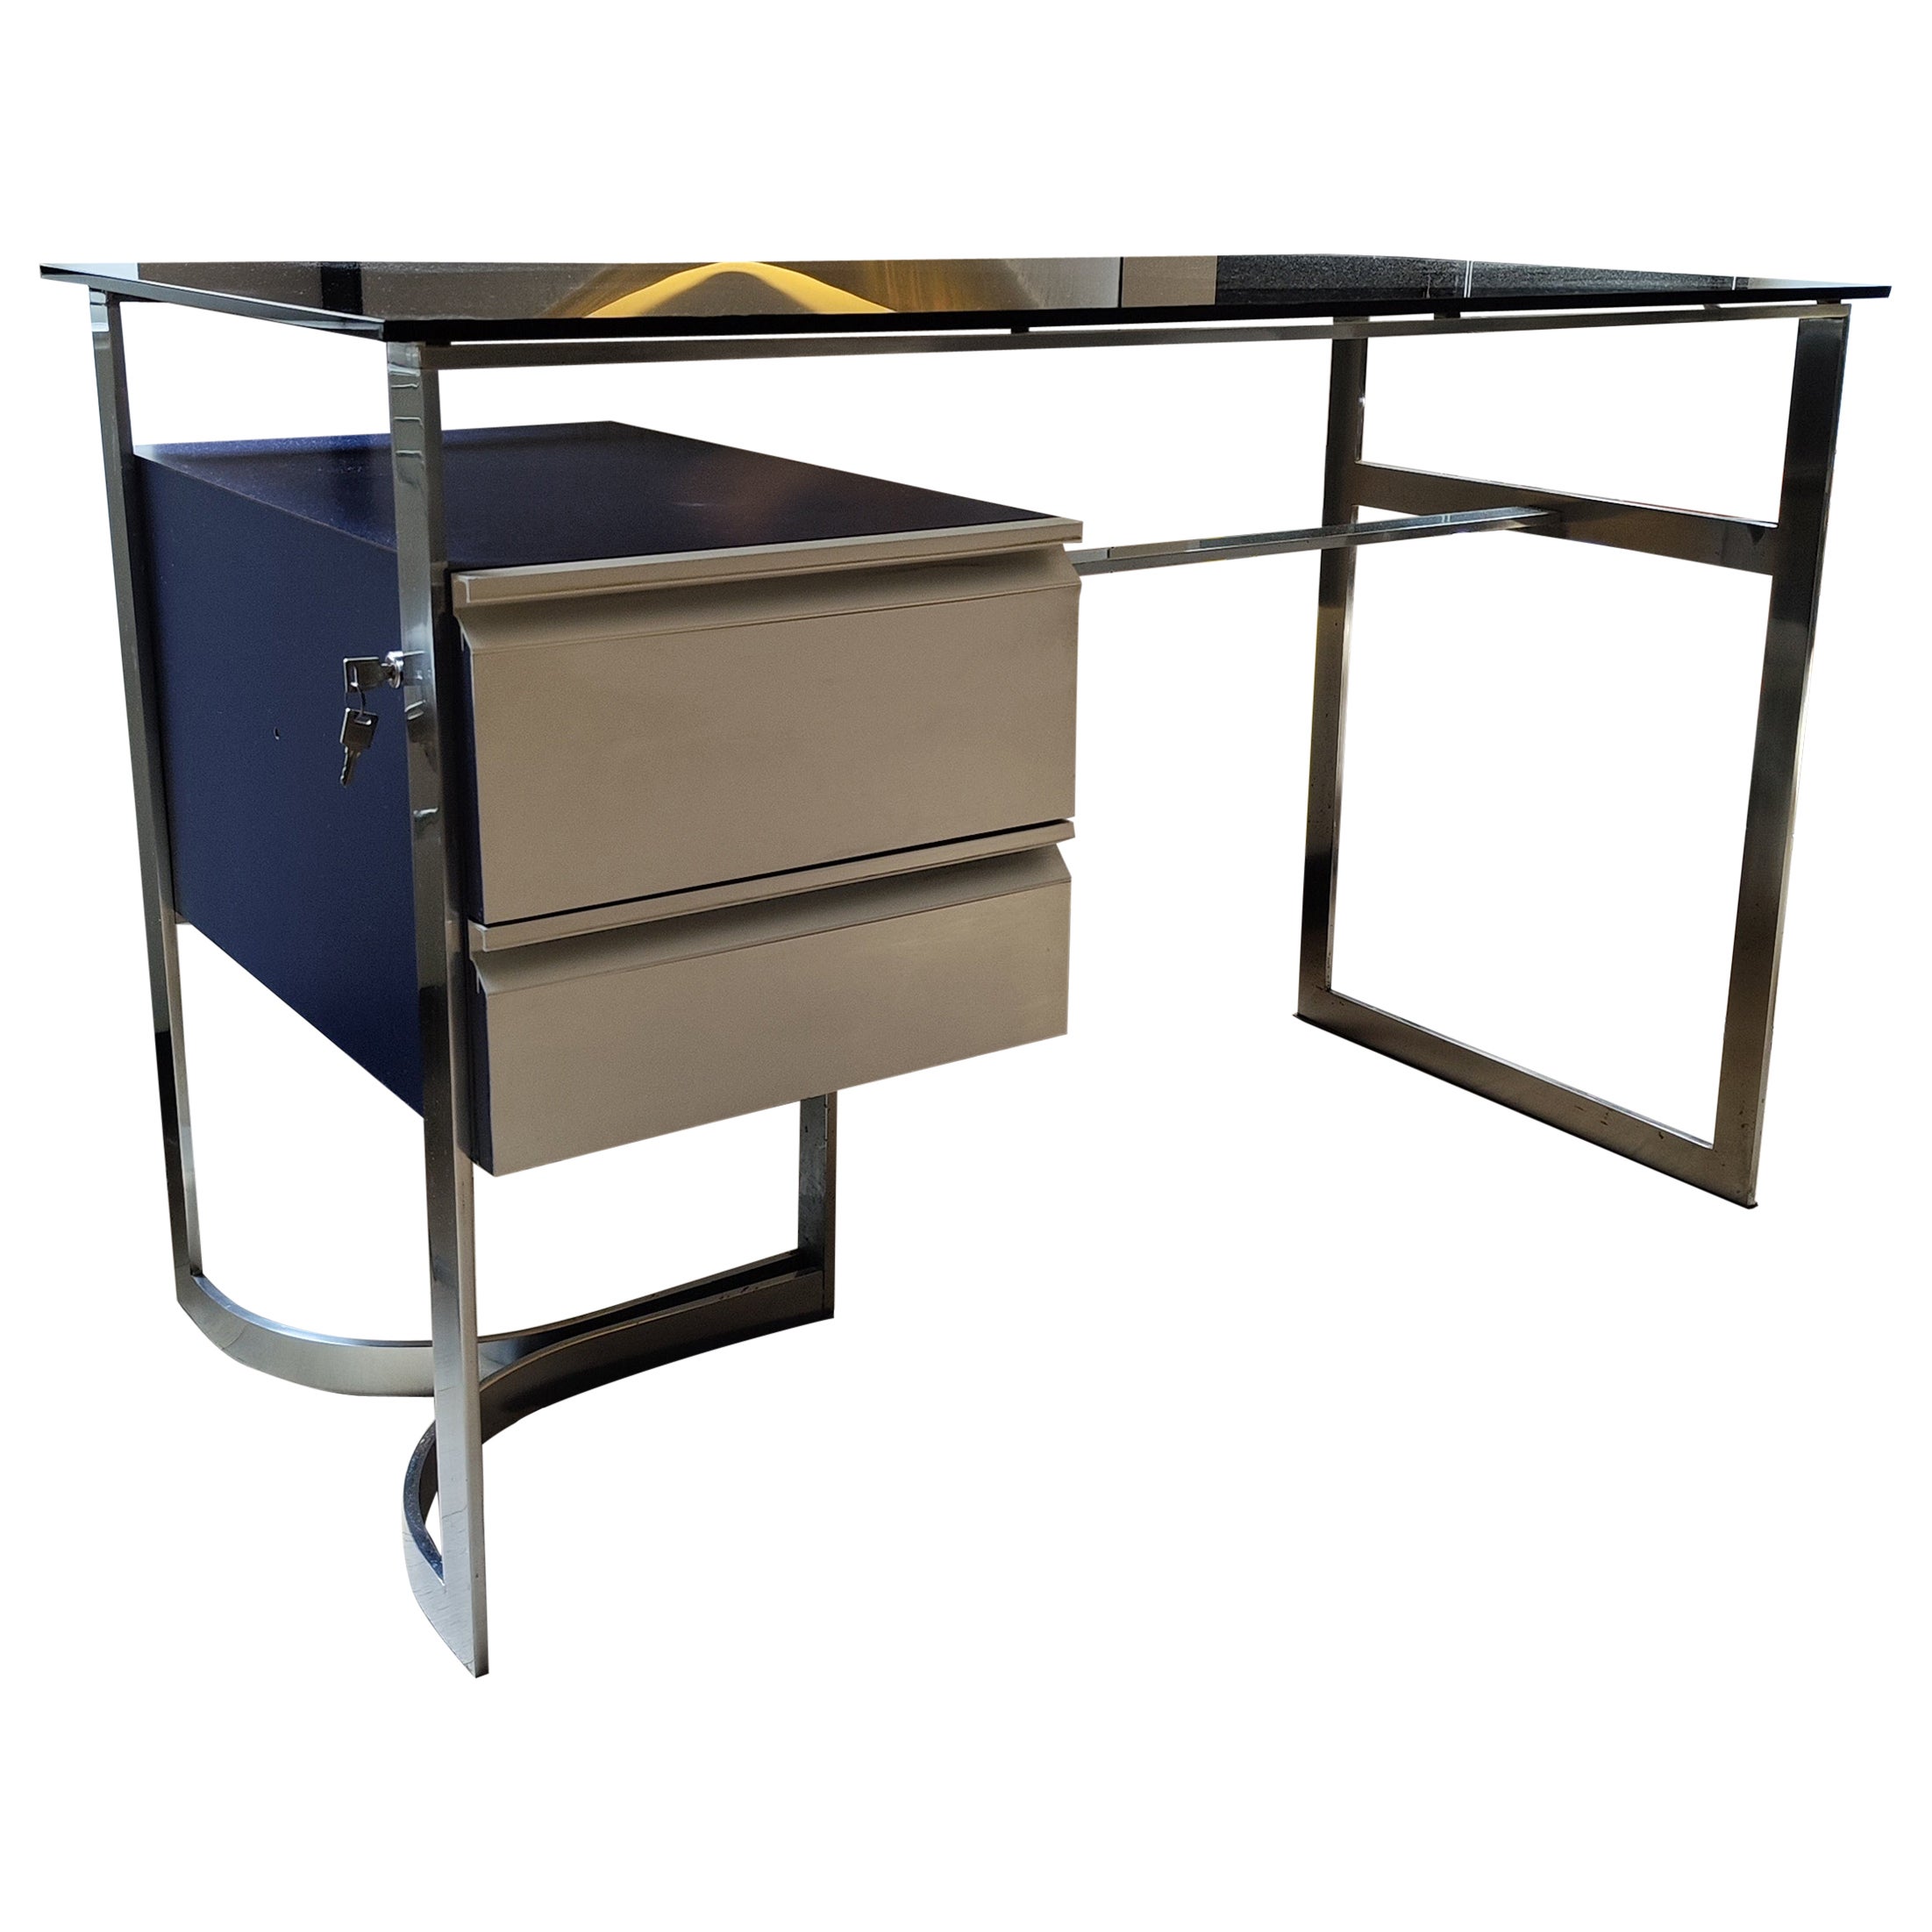 Patrice Maffei Desk for Kappa, 70s, Brushed Stainless Steel, Smoked Glass, 1970 For Sale